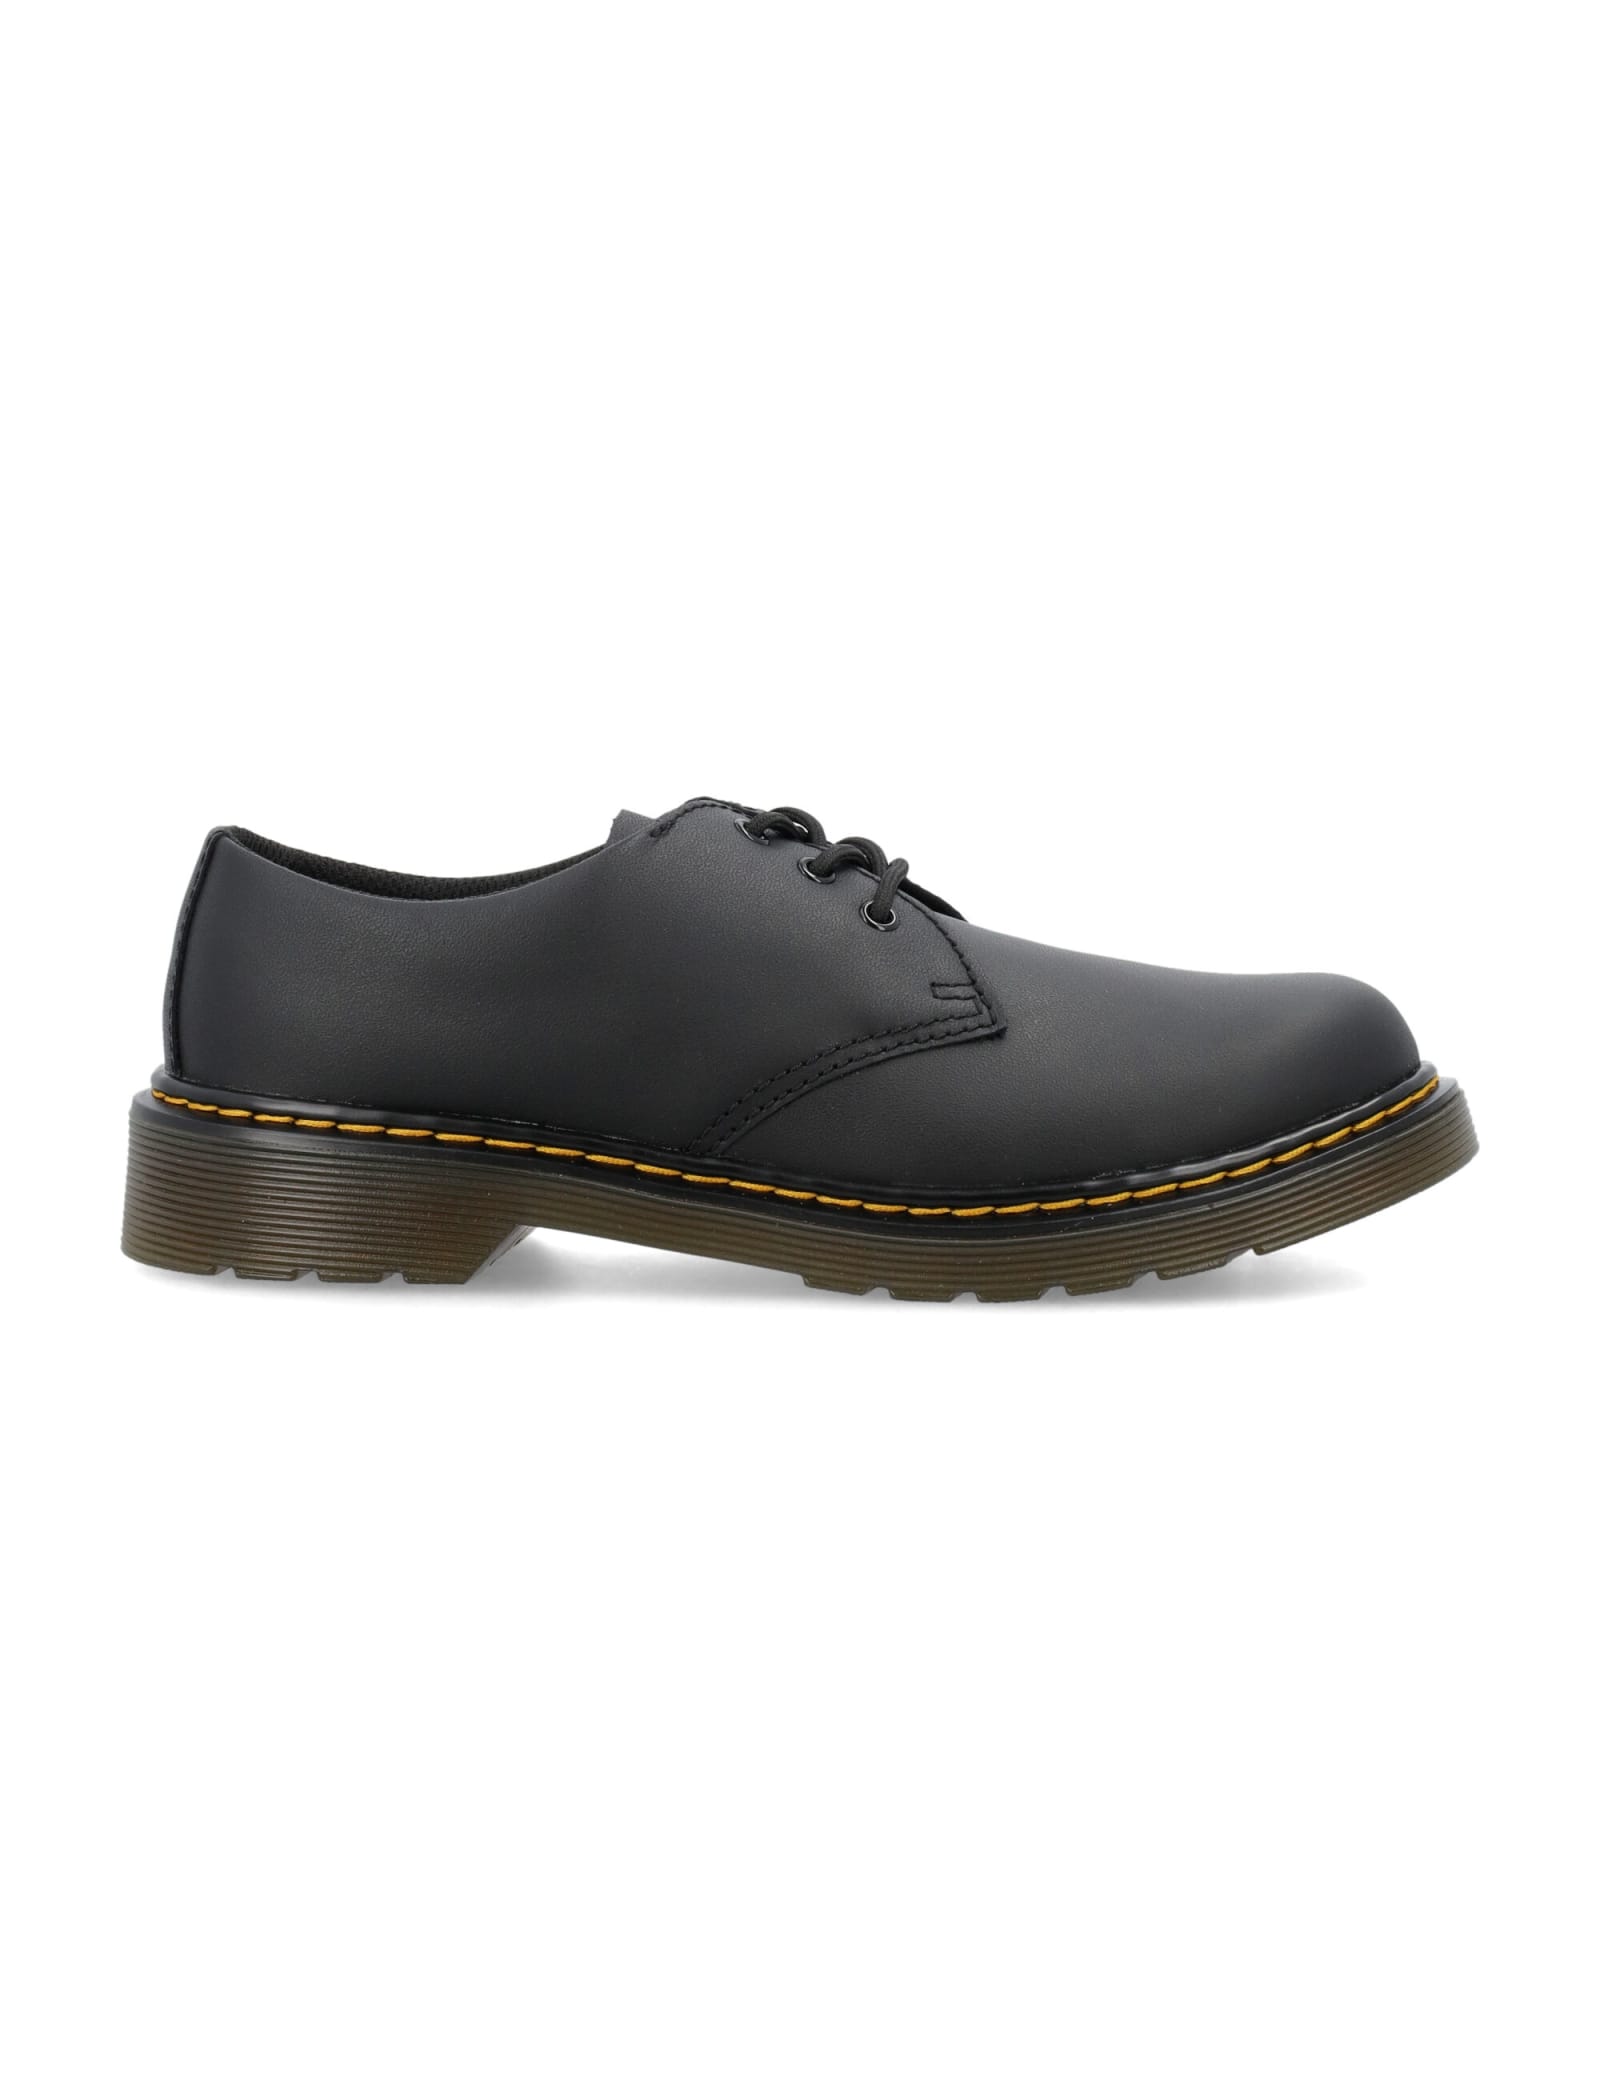 DR. MARTENS' 1461 SOFTY T